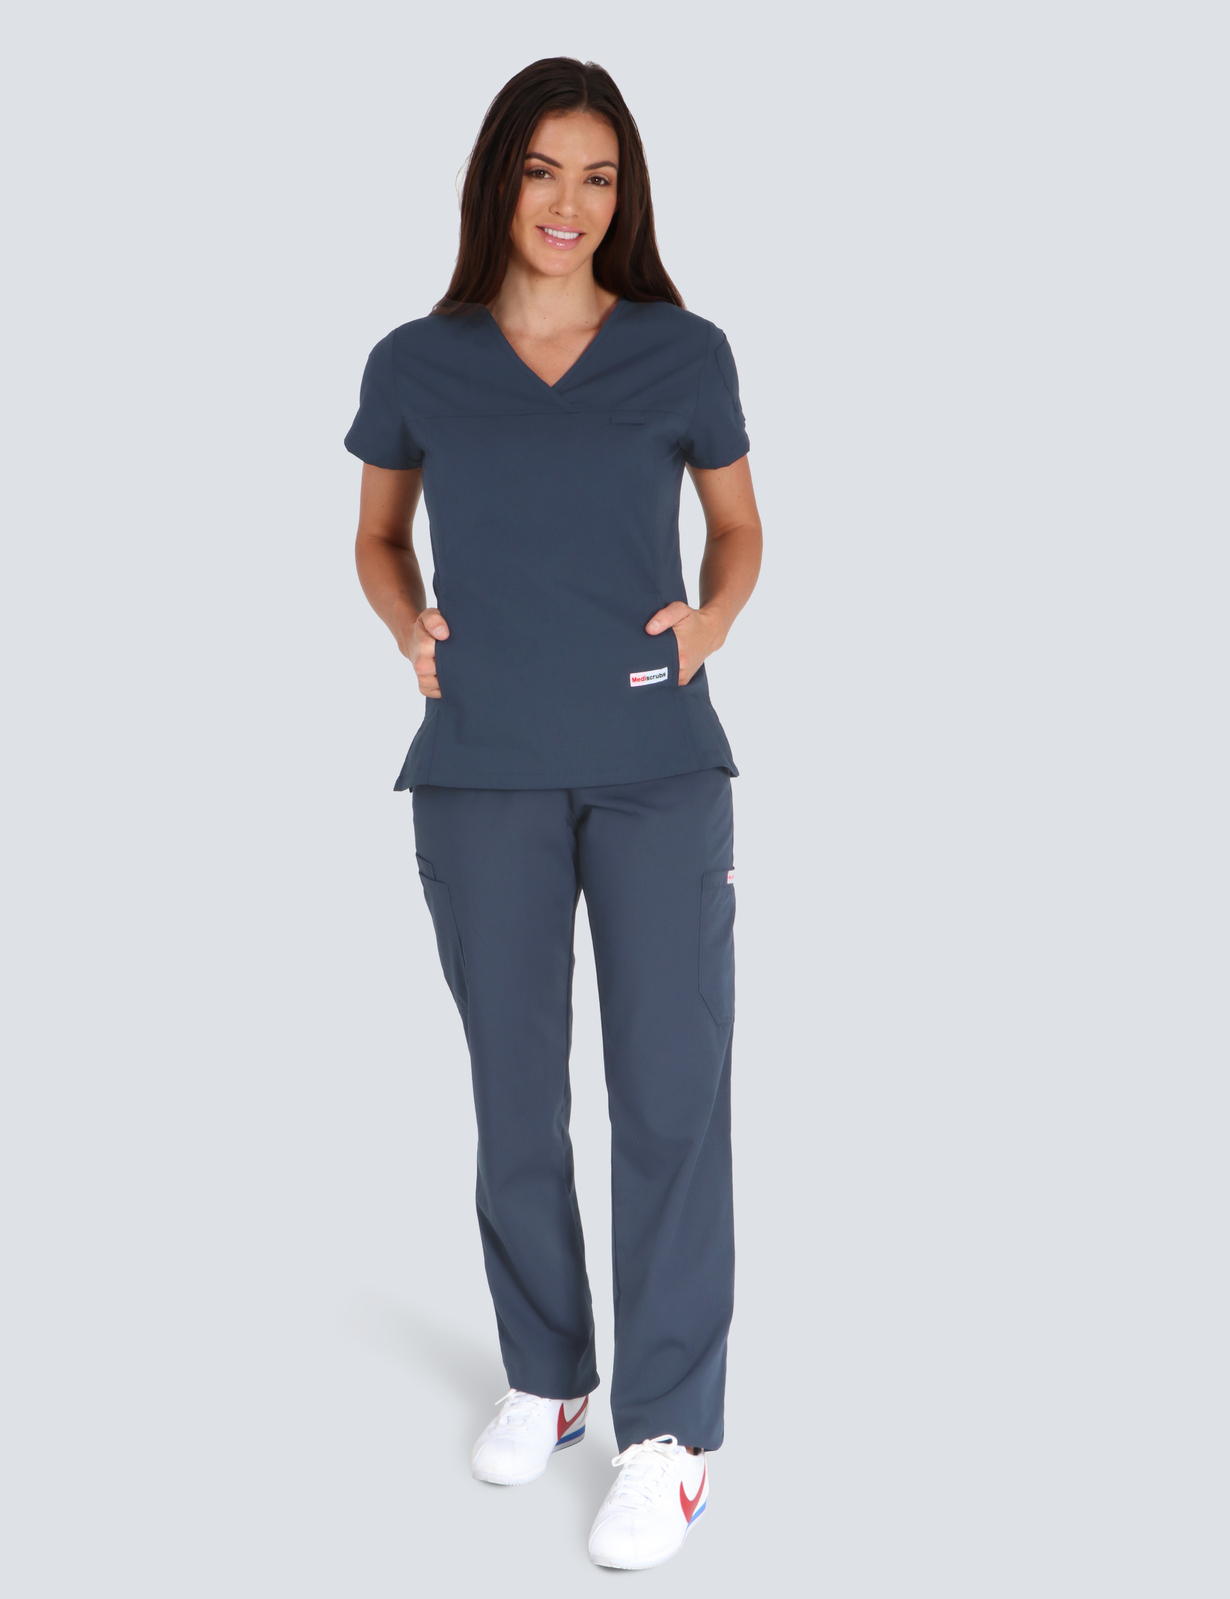 SCPU Hospital - Registered Nurse (Women's Fit Solid Scrub Top and Cargo Pants in Aqua incl Logos)